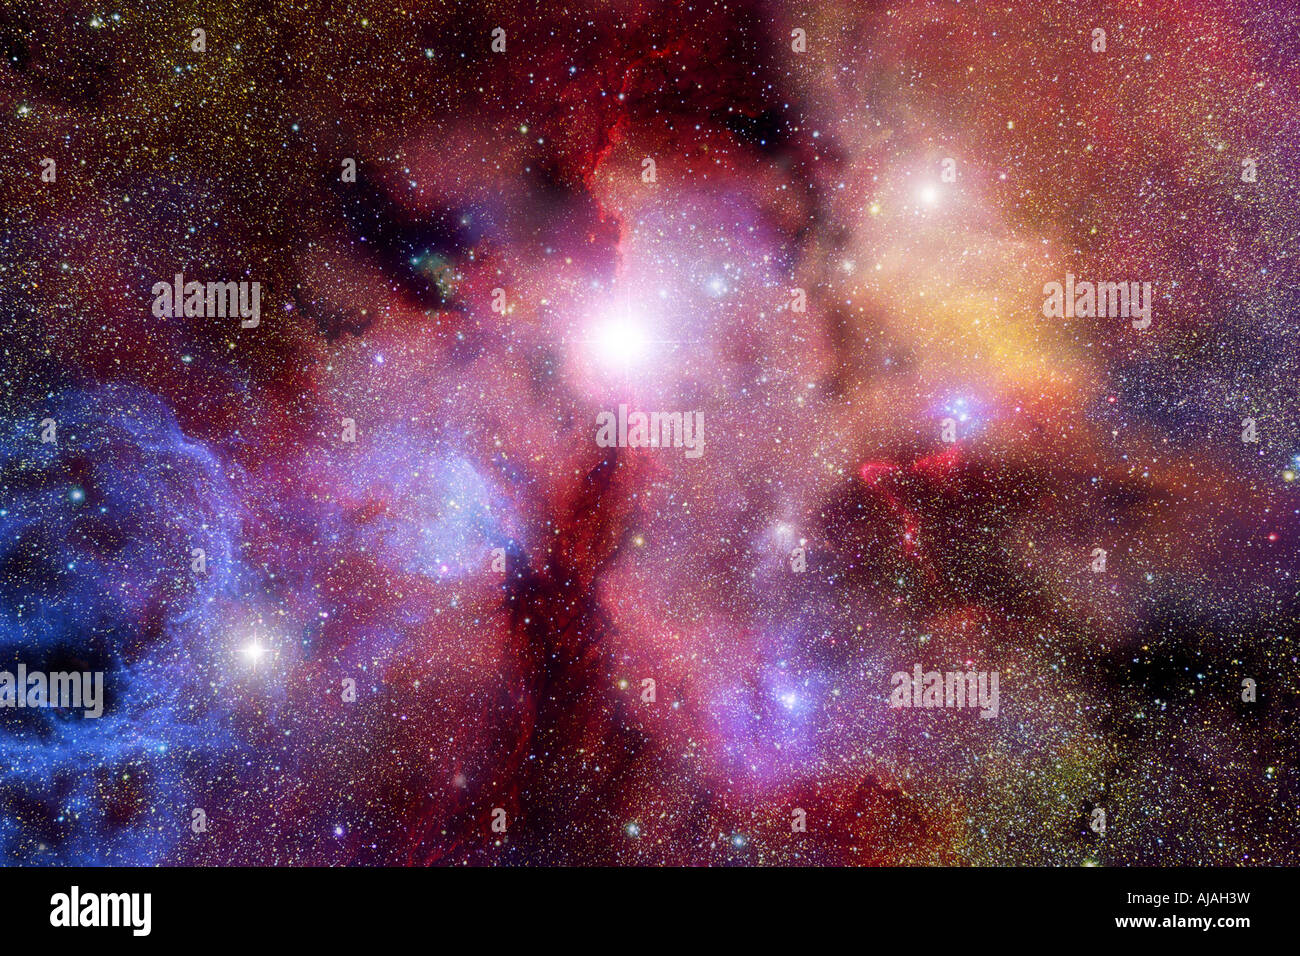 Very realistic stellar field with red nebulae Stock Photo